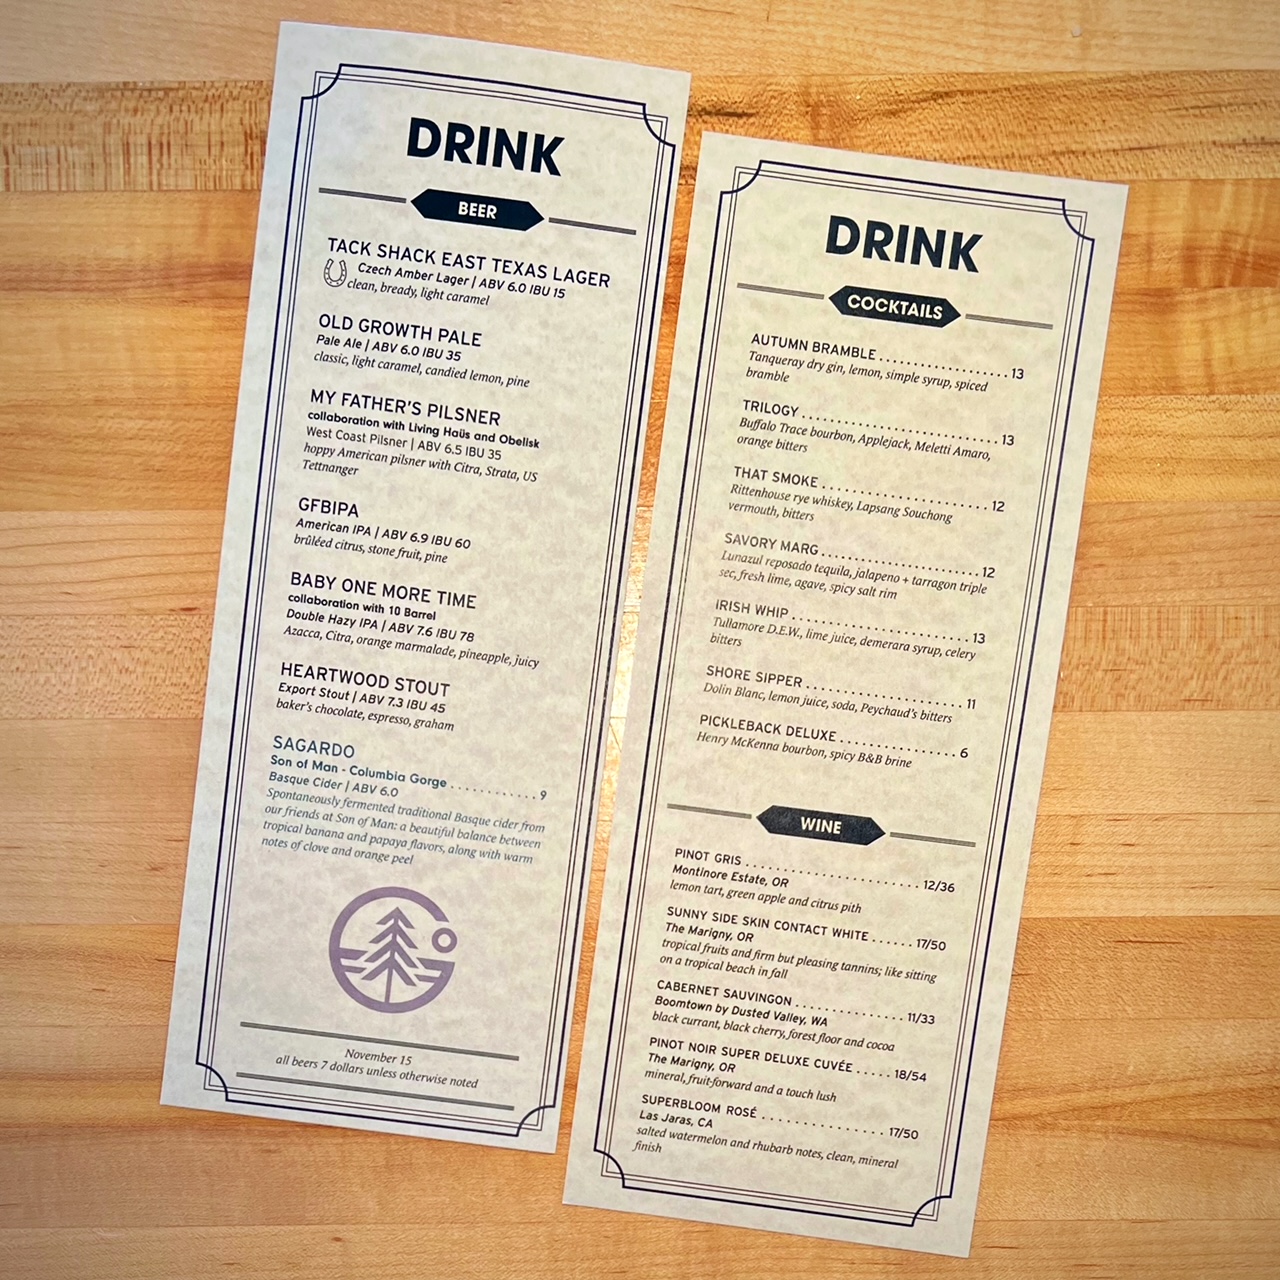 The beer and cocktail menu for the opening weekend at Grand Fir Brewing.